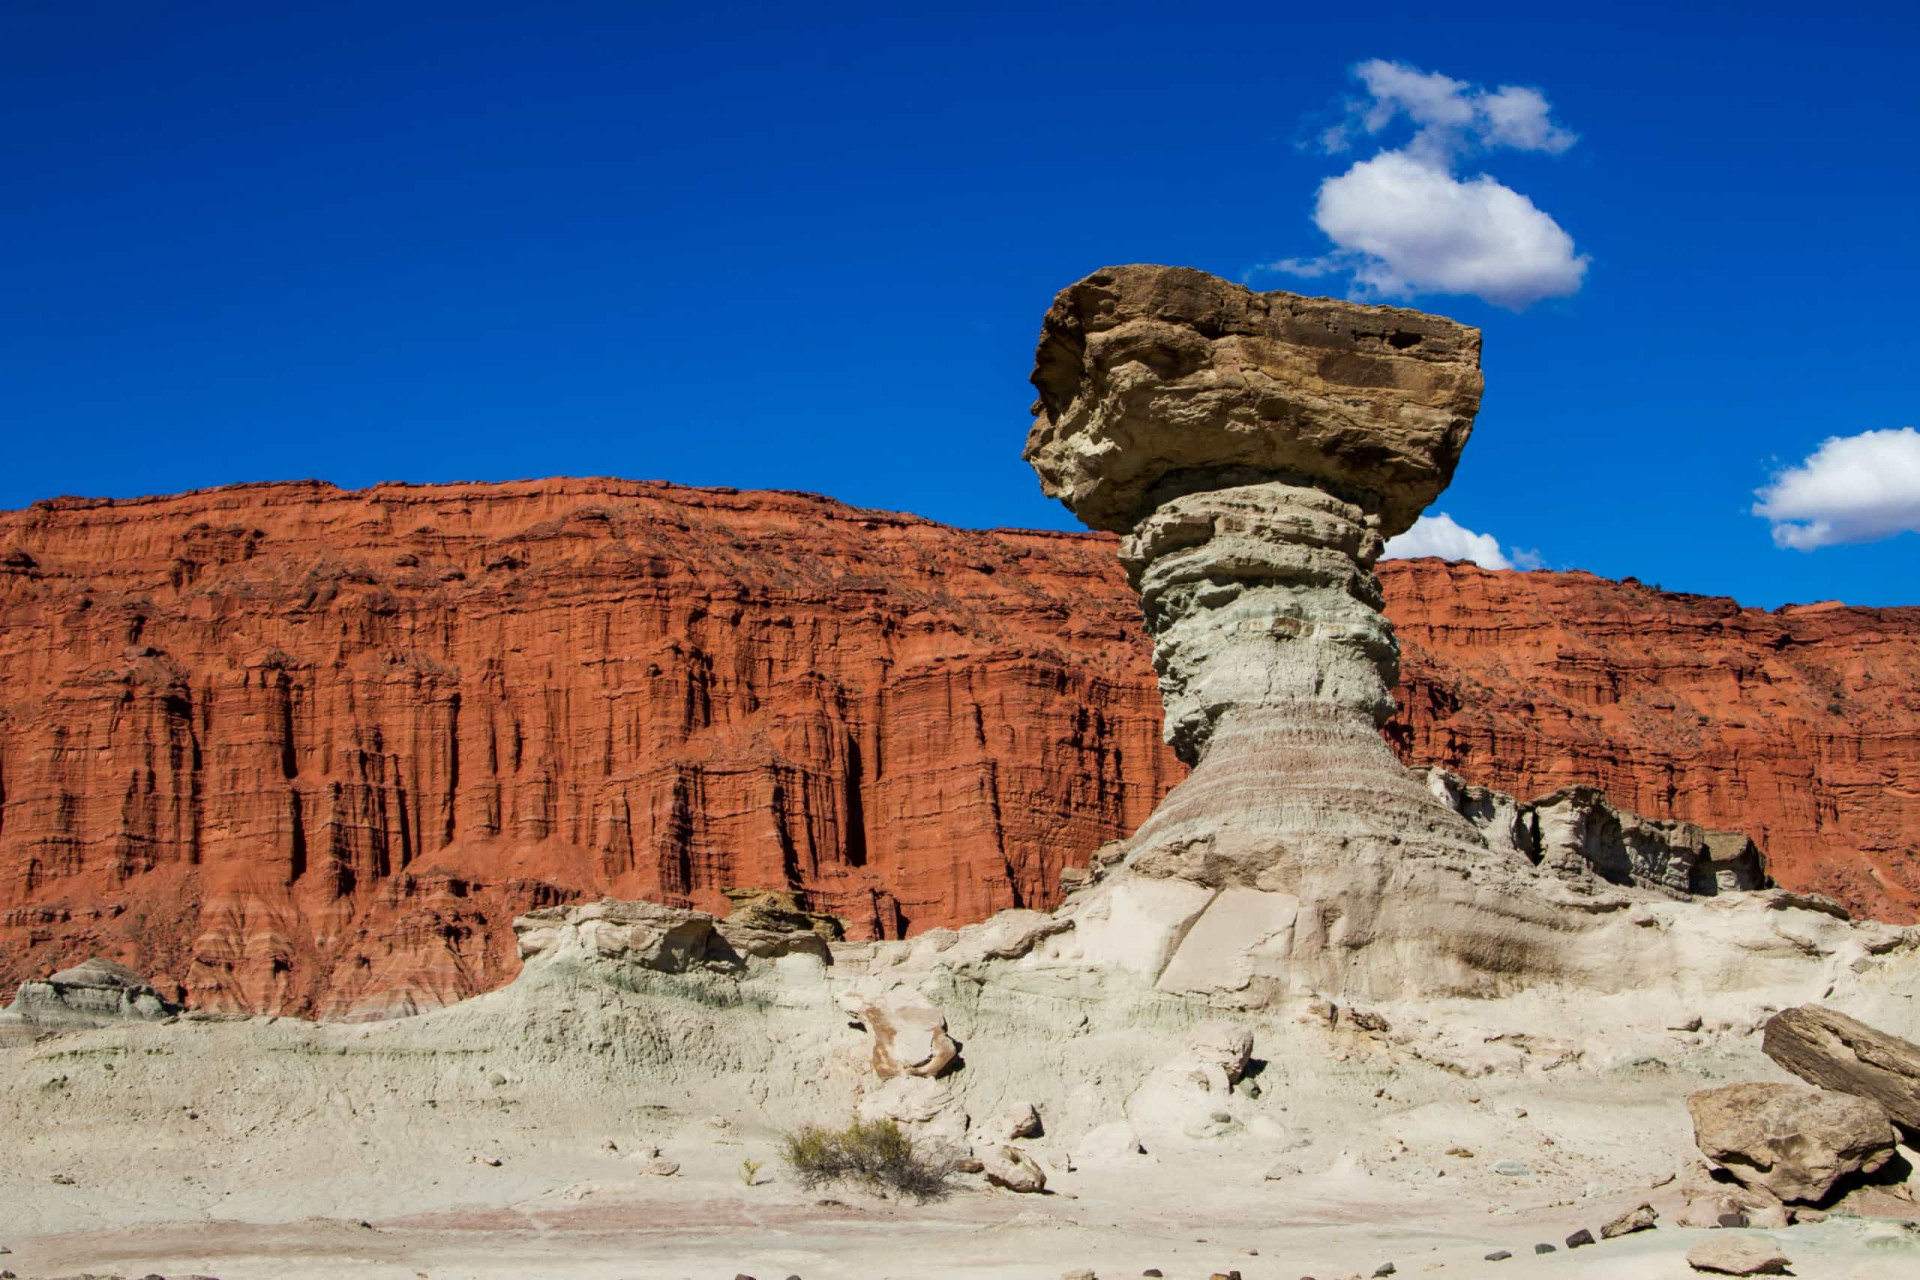 Location: San Juan and La Rioja Province<br>Criteria: Natural<br>Year established: 2000<br>Description: The unworldly appearance of the wind-eroded rock formations that texture this region, plus the fact that the parks represent the most complete fossil site of the Triassic periods (245-208 million years ago), endow the entire area with unique geological characteristics.<p><a href="https://www.msn.com/en-us/community/channel/vid-7xx8mnucu55yw63we9va2gwr7uihbxwc68fxqp25x6tg4ftibpra?cvid=94631541bc0f4f89bfd59158d696ad7e">Follow us and access great exclusive content every day</a></p>